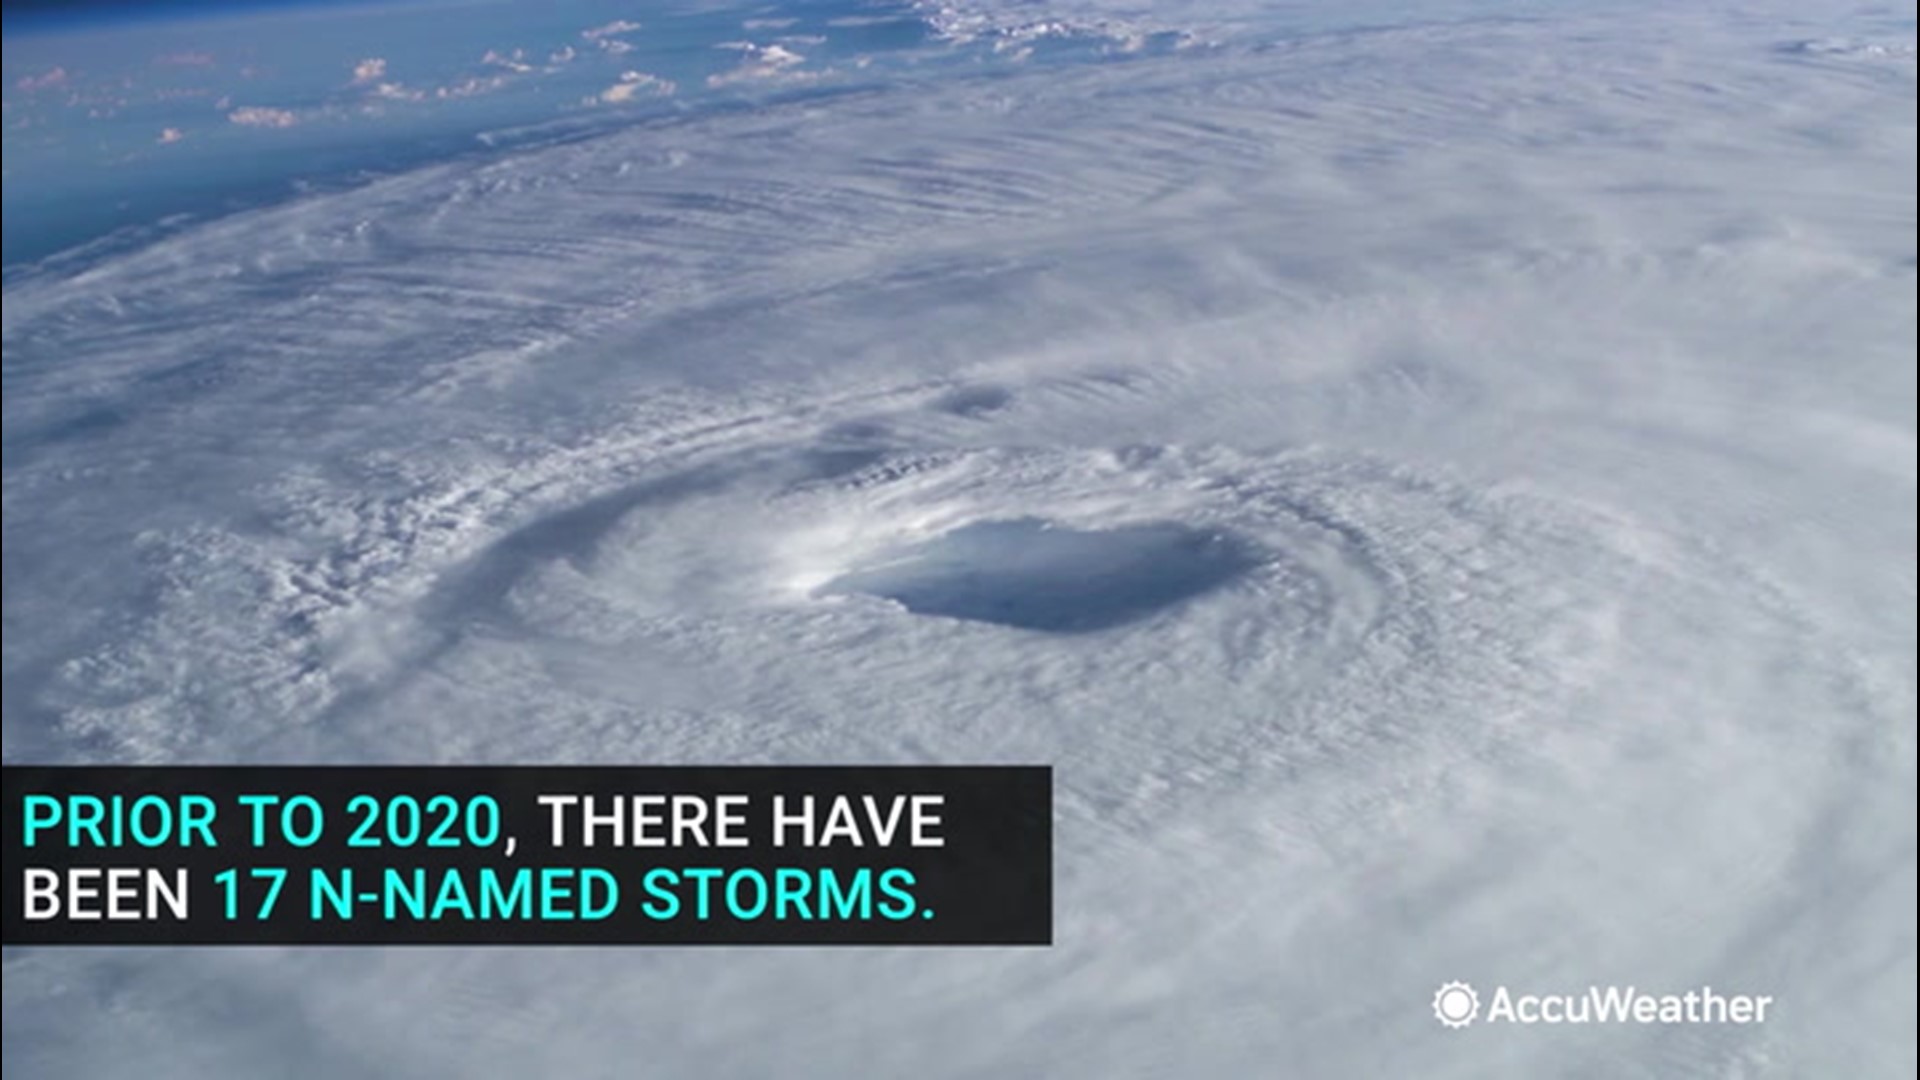 As we continue this historic 2020 hurricane season, we look back at the history of N-named storms as well as a sneak preview of this year's 'N' storm.